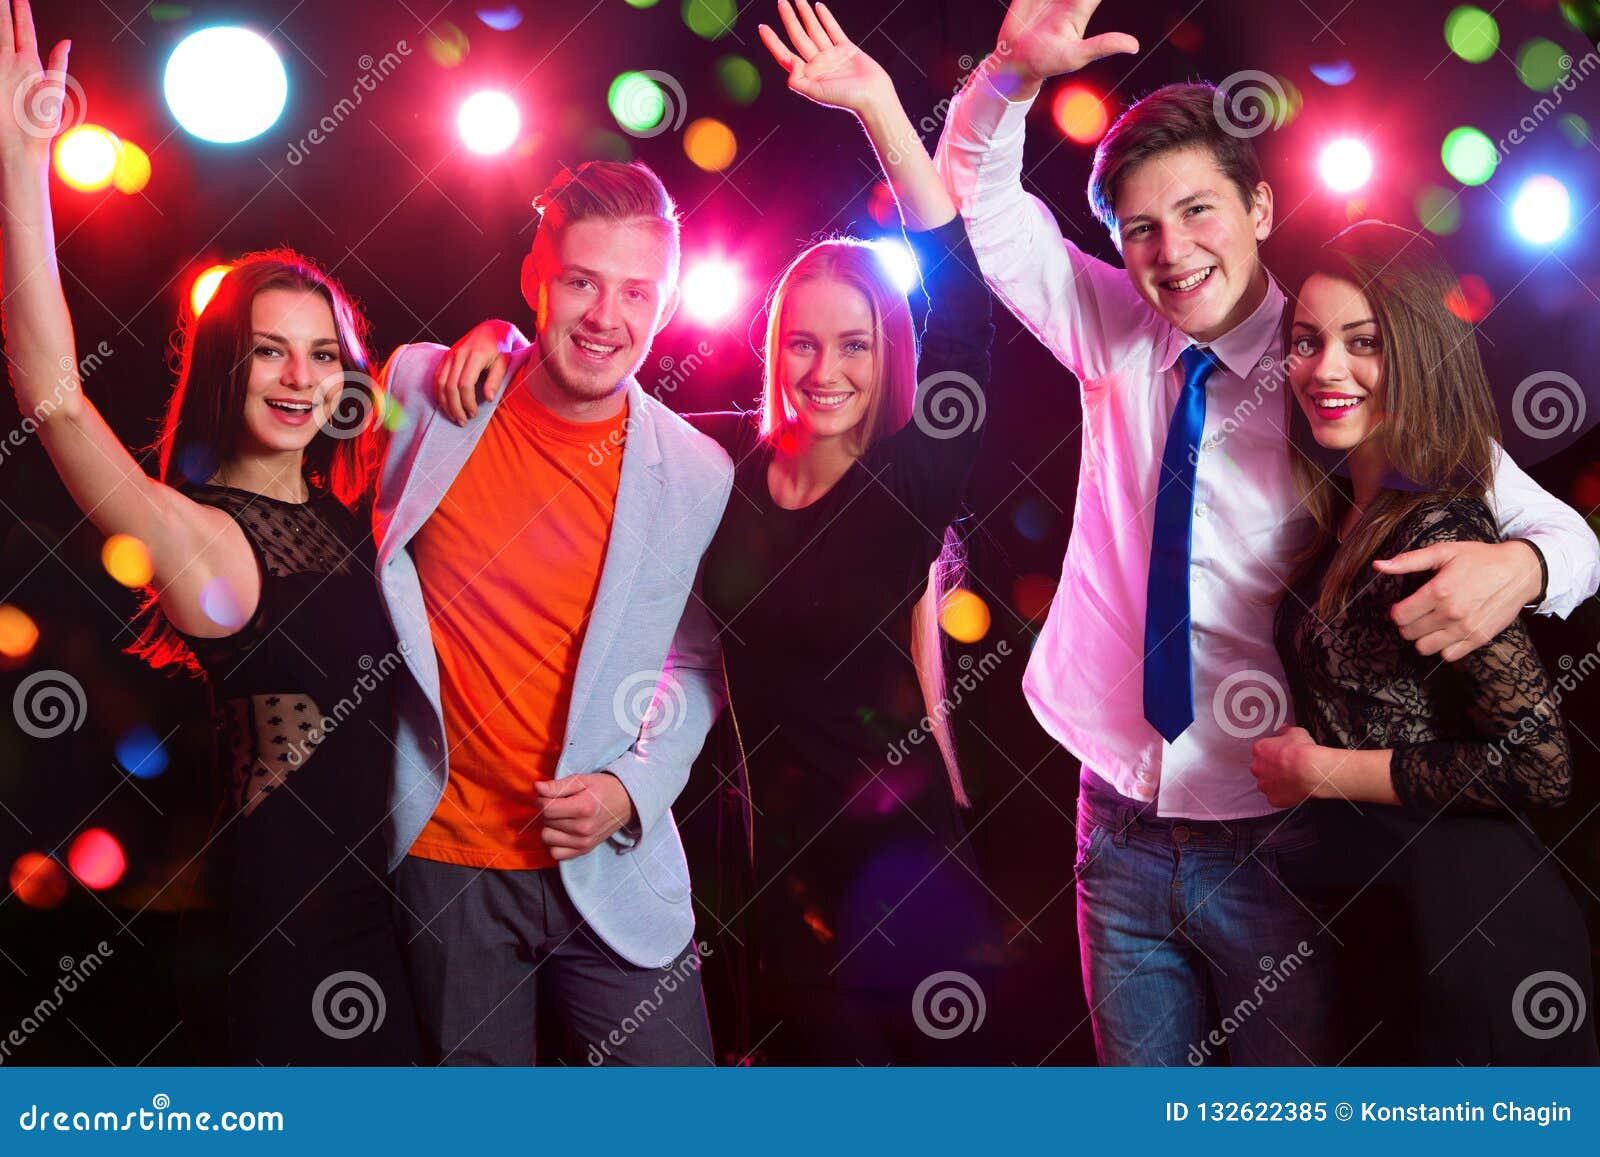 Young people at party stock image. Image of expressing - 132622385